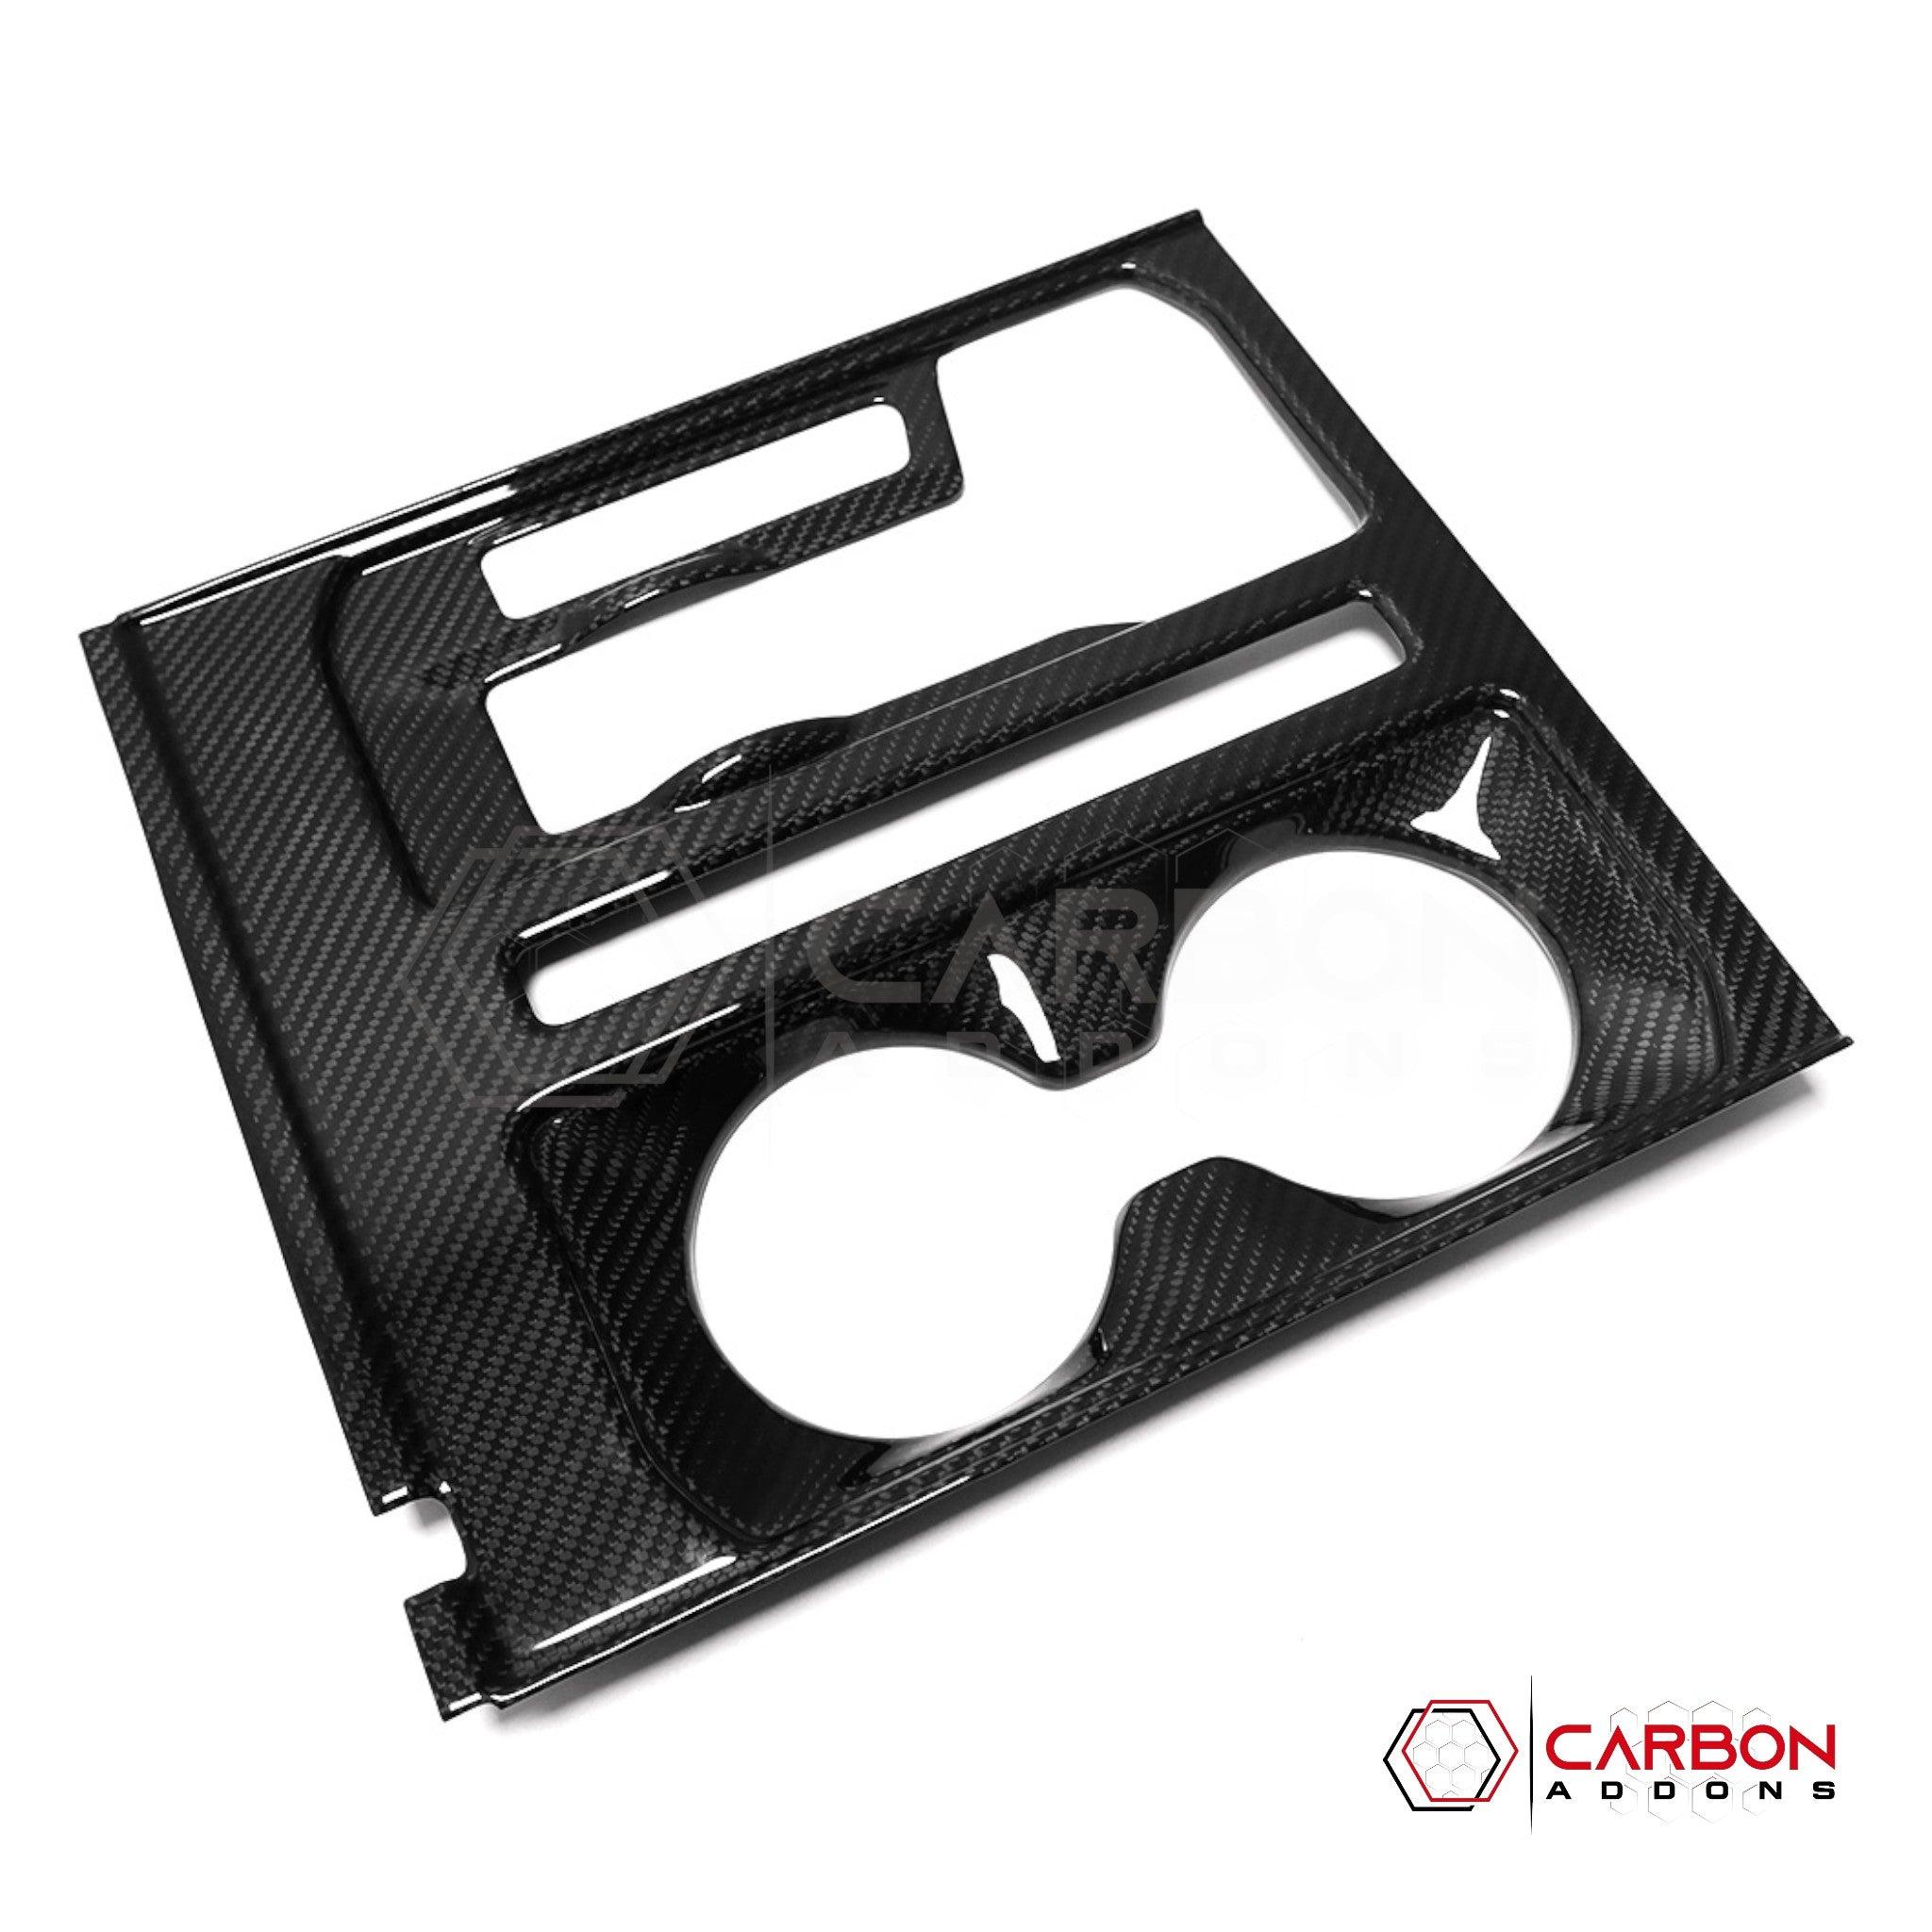 [Coming Soon] Ford F150 2021-Up Center Console Hard Carbon Fiber Cover - carbonaddons Carbon Fiber Parts, Accessories, Upgrades, Mods